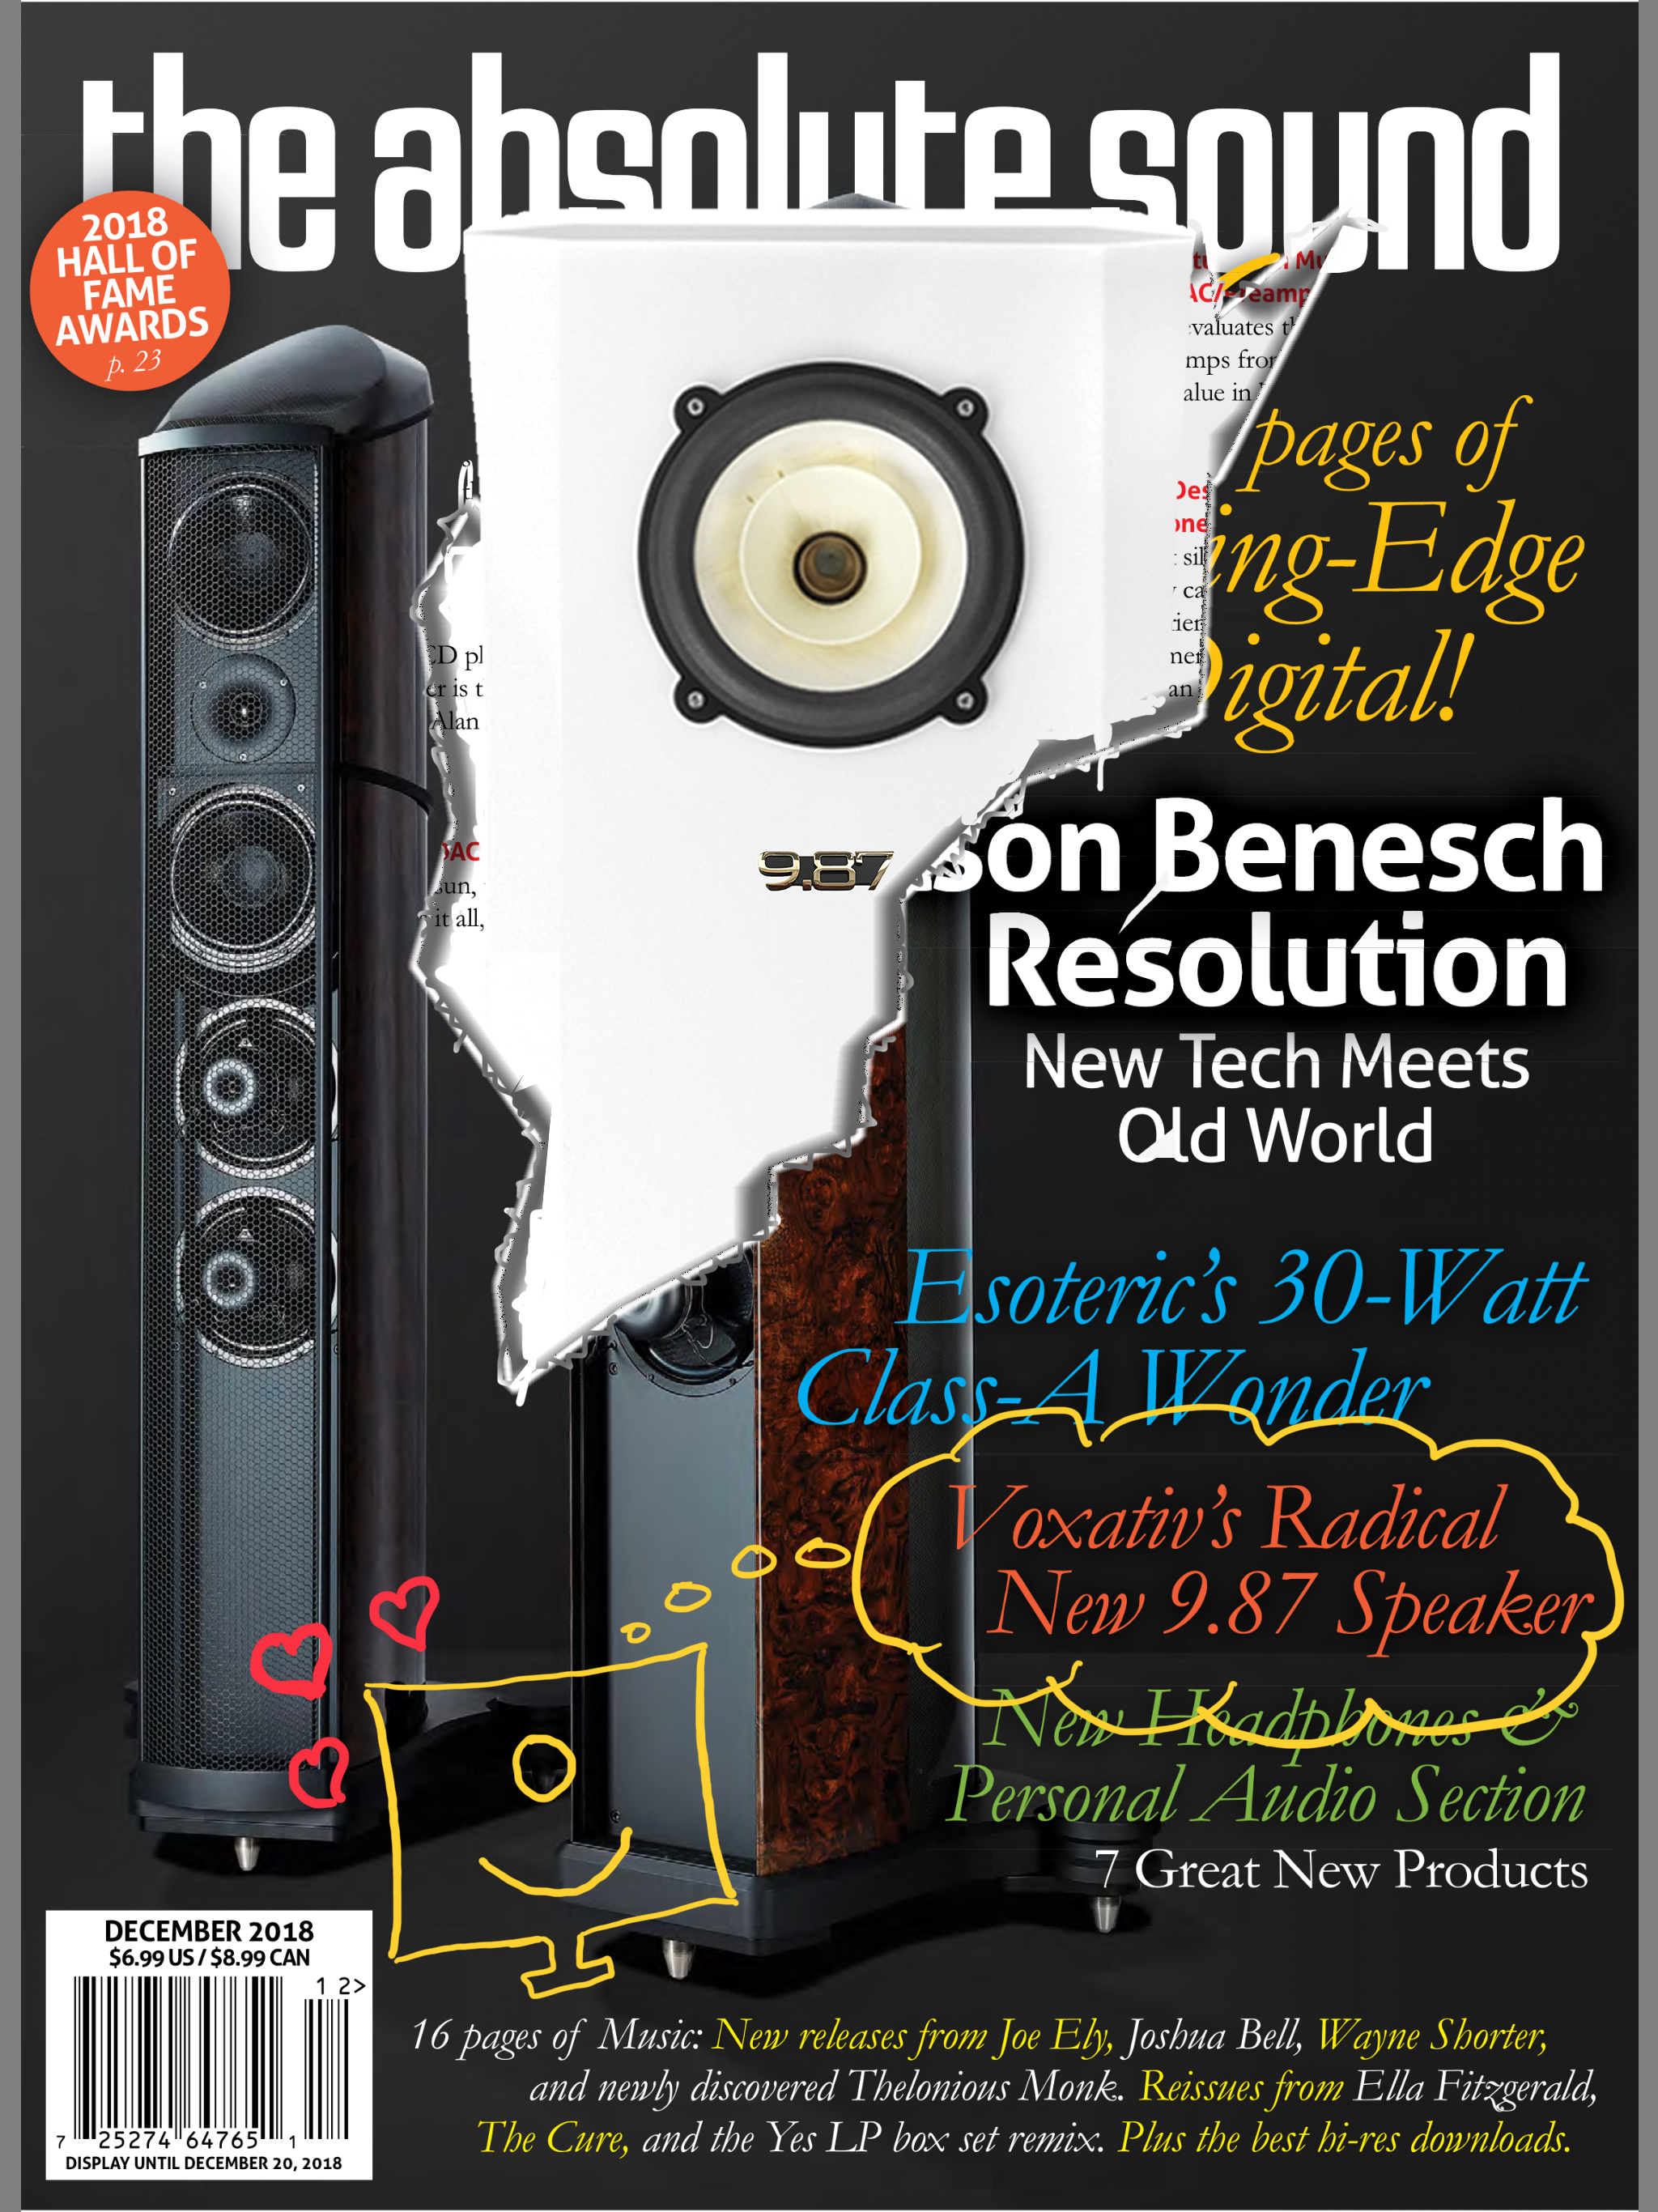 Bestudeer Knuppel Monarch Voxativ Jonathan Valin reviews our 9.87 System in his "Cutting Edge" column  (TAS, 289) REVIEWS